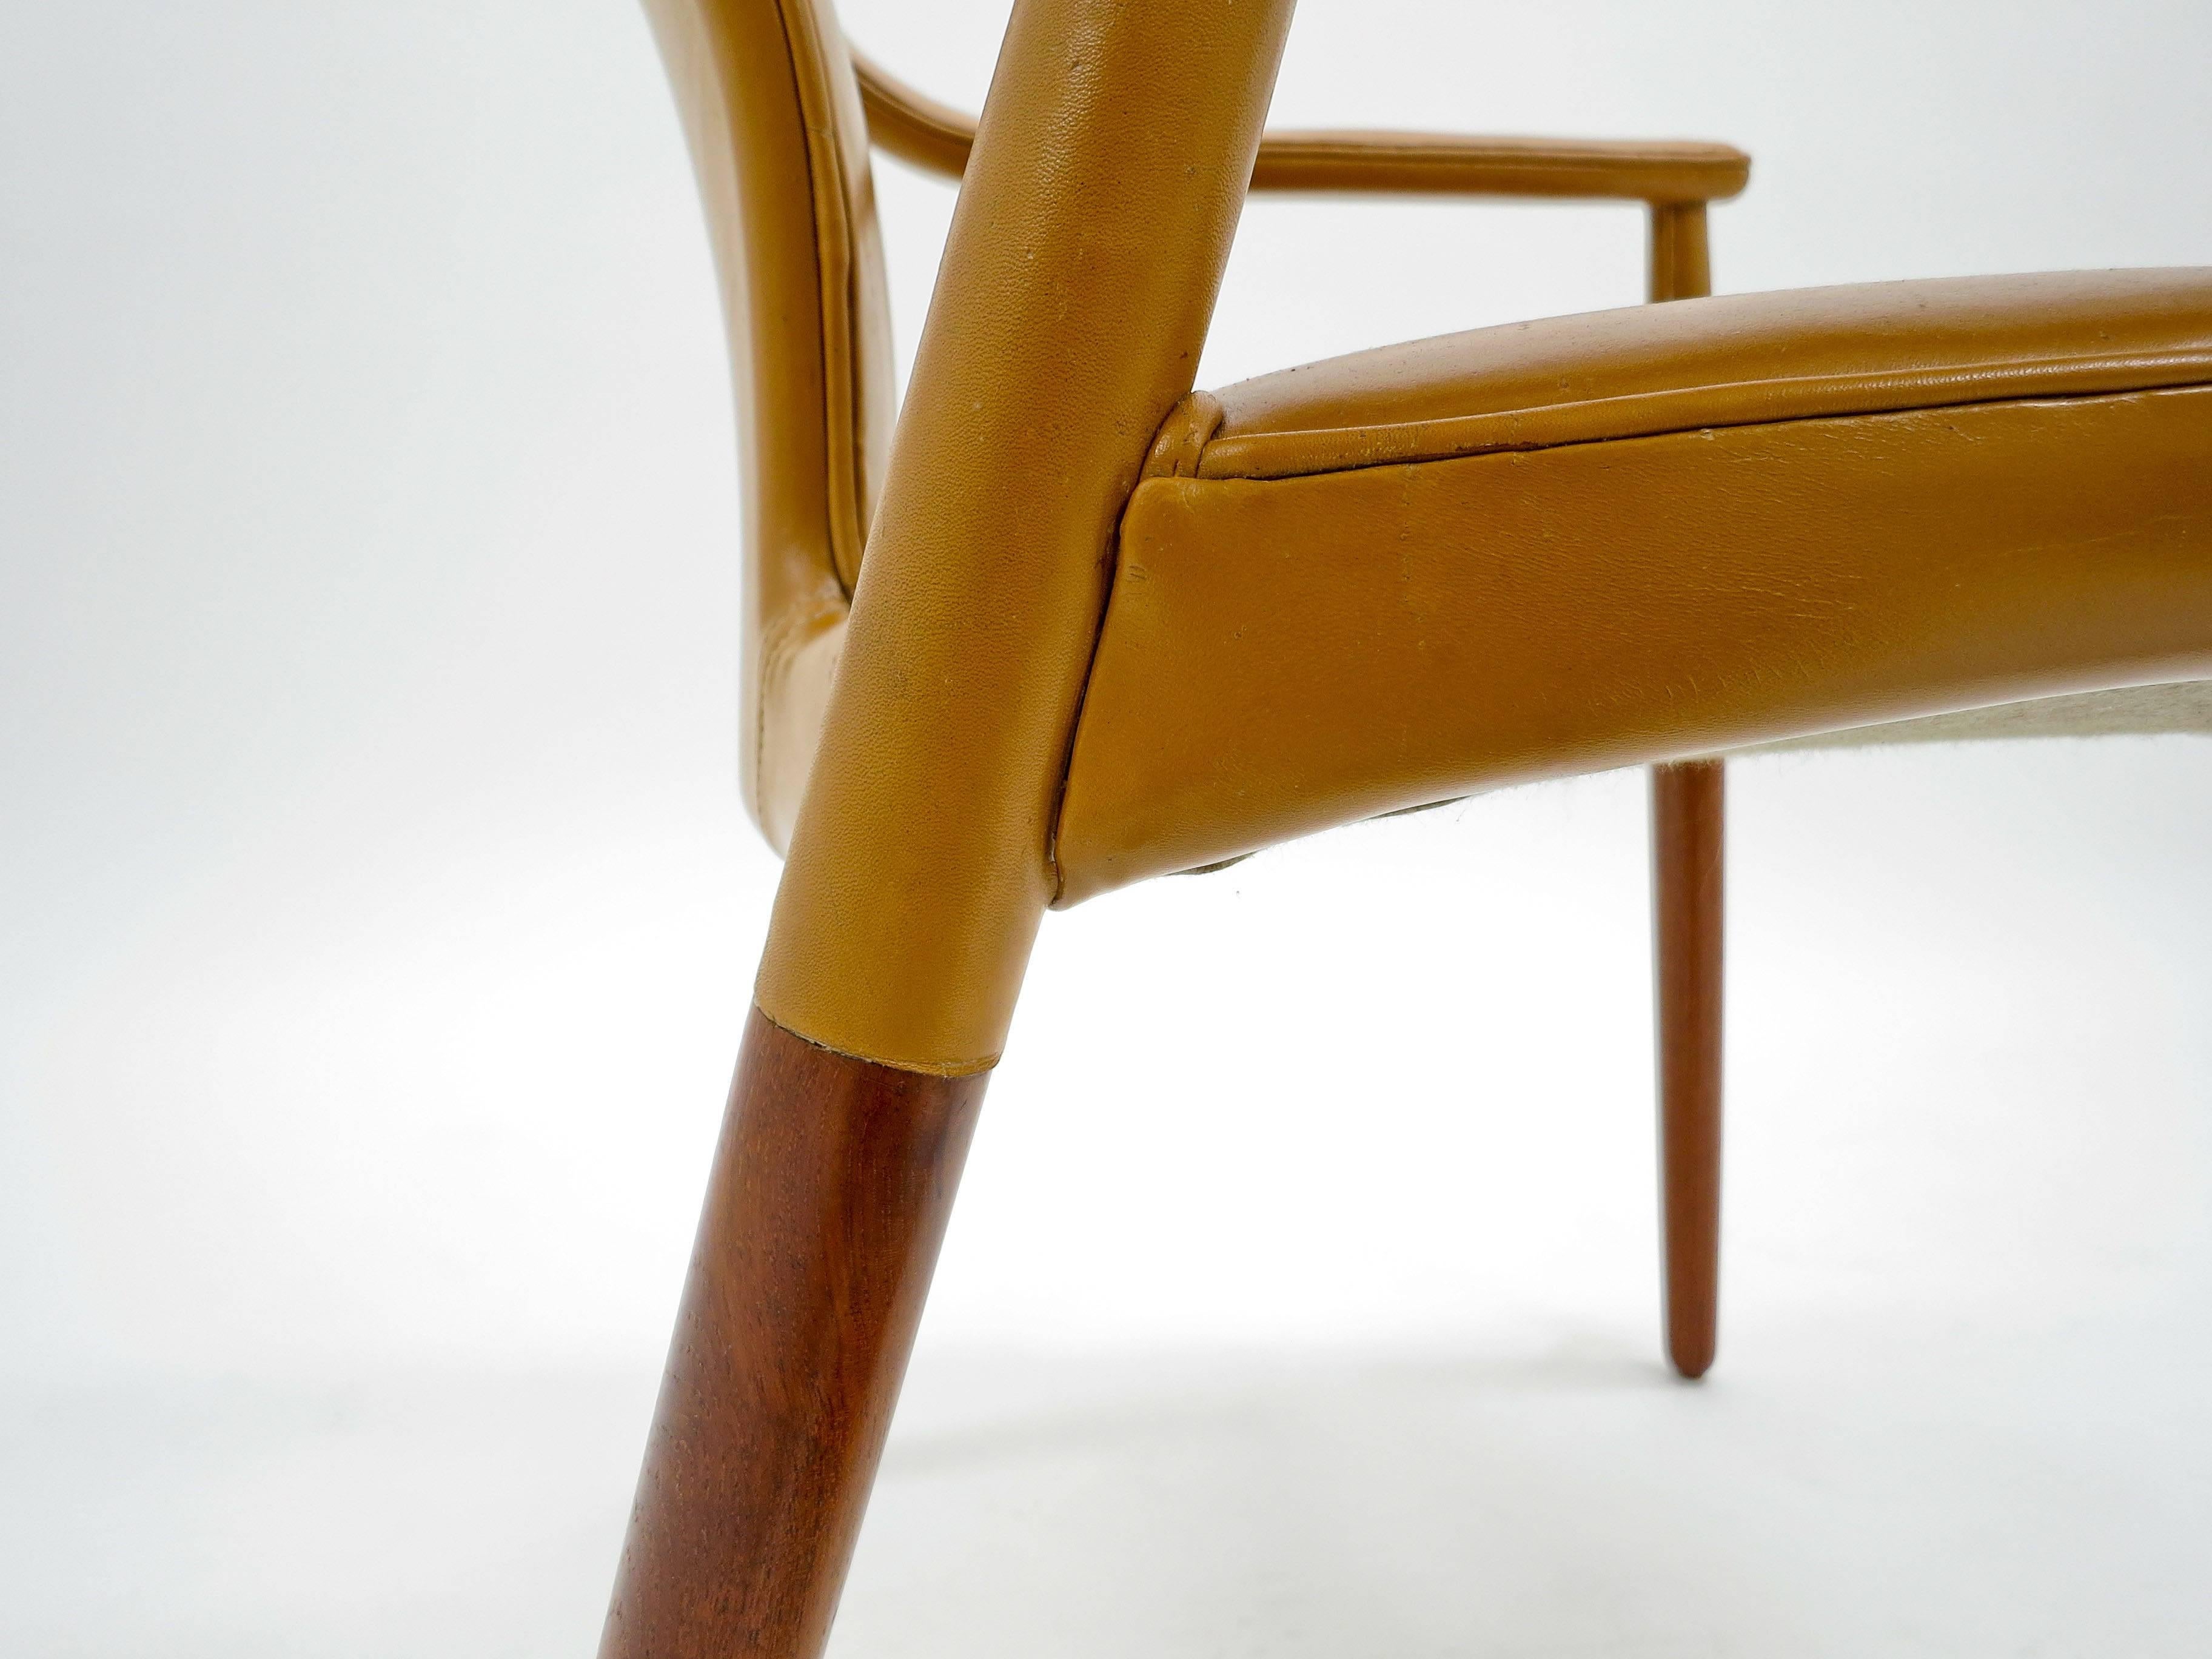 Bender Madsen and Larsen Armchair Leather and Teak, Danish, 1950s For Sale 3